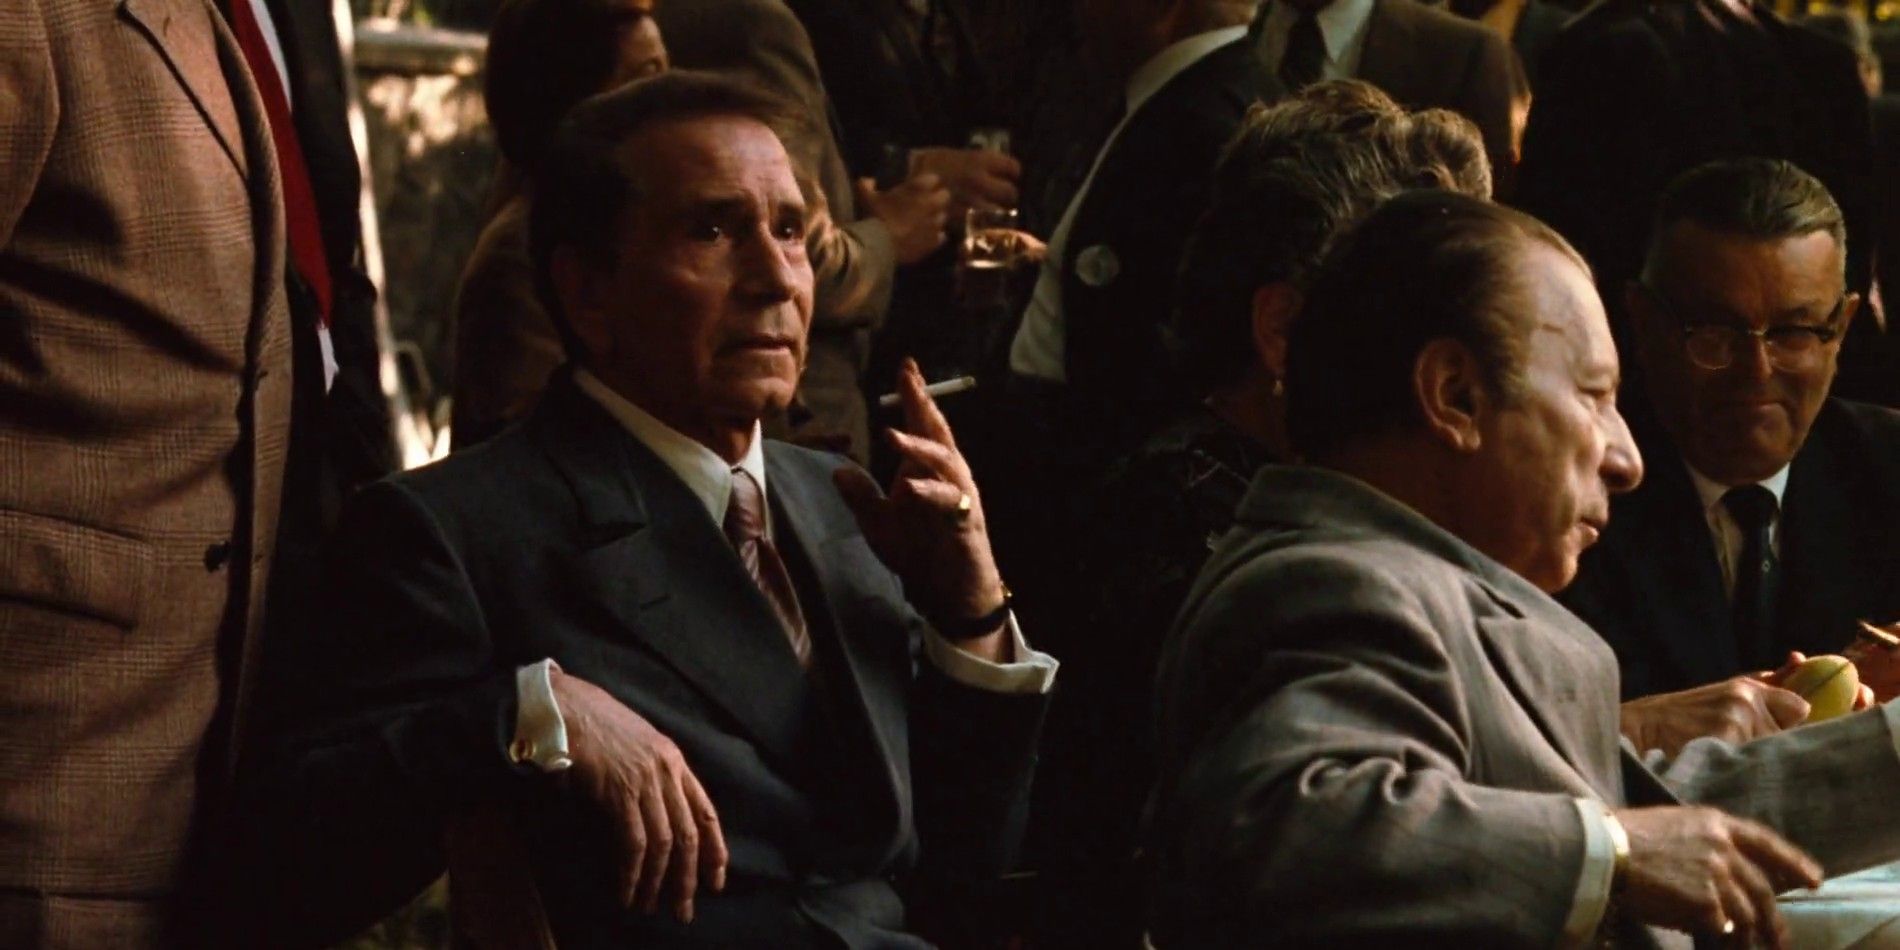 Barzini at a Commission meeting in The Godfather